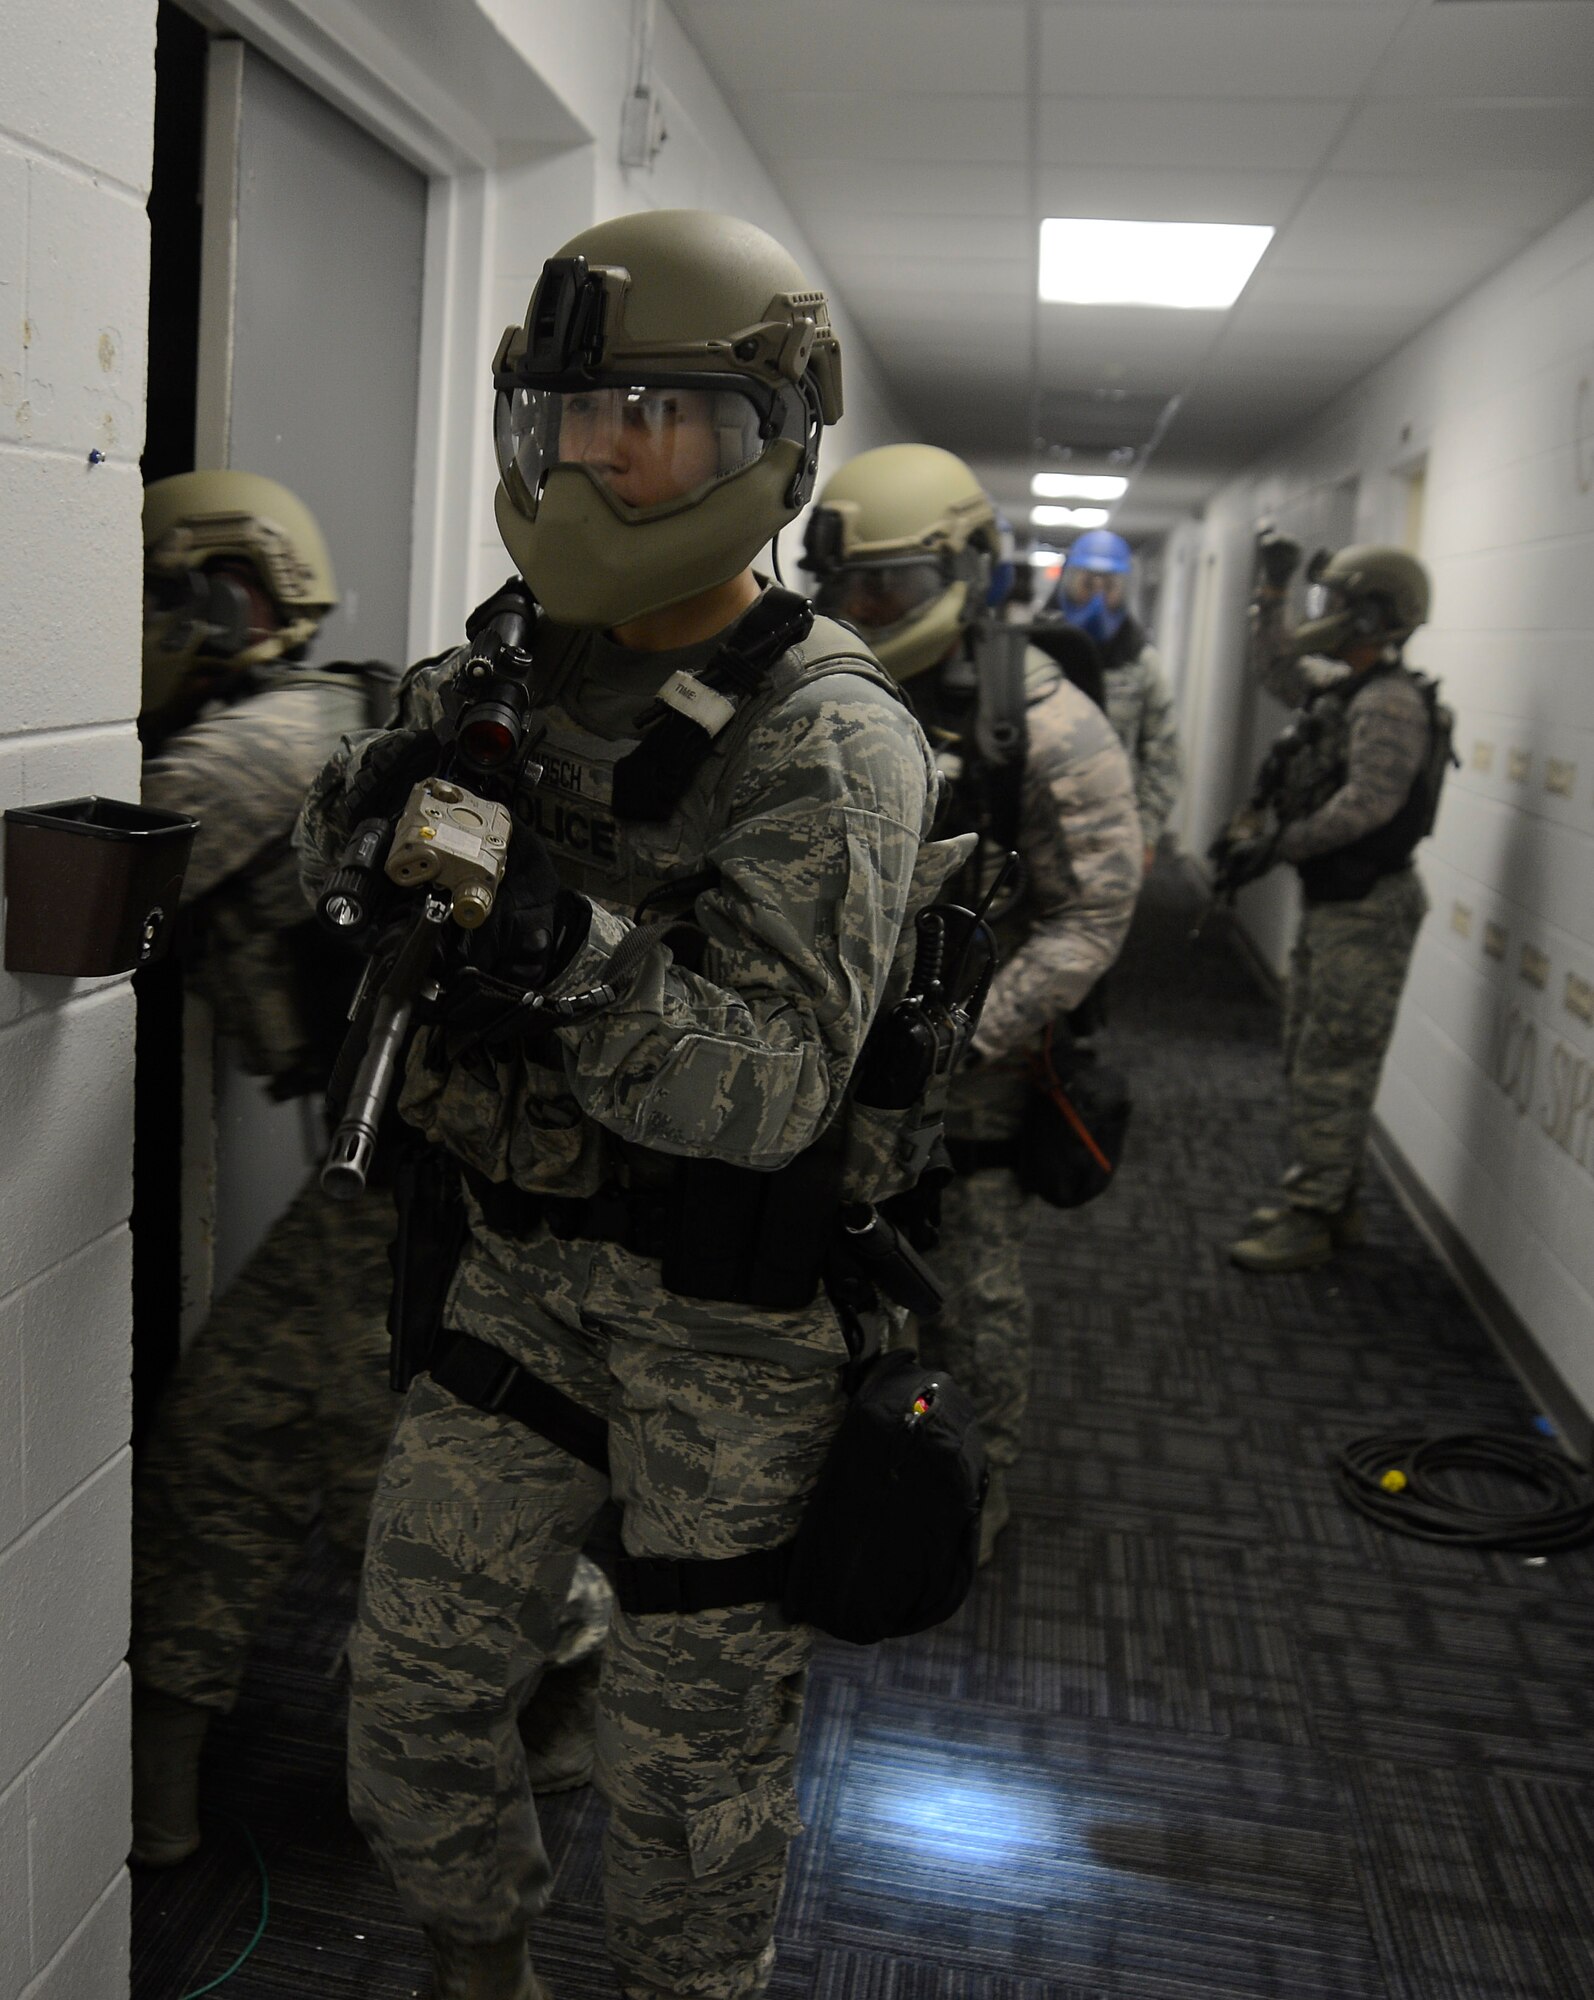 Emergency services team (EST) members assigned to the 6th Security Forces Squadron demonstrate how to properly clear a building during an immersion with leadership from the 6th Air Mobility Wing, Nov. 21, 2016 at MacDill Air Force Base, Fla. The EST members are highly-trained and highly-skilled tactical team capable of mitigating high-risk incidents that could potentially arise. (U.S. Air Force photo by Senior Airman Jenay Randolph)